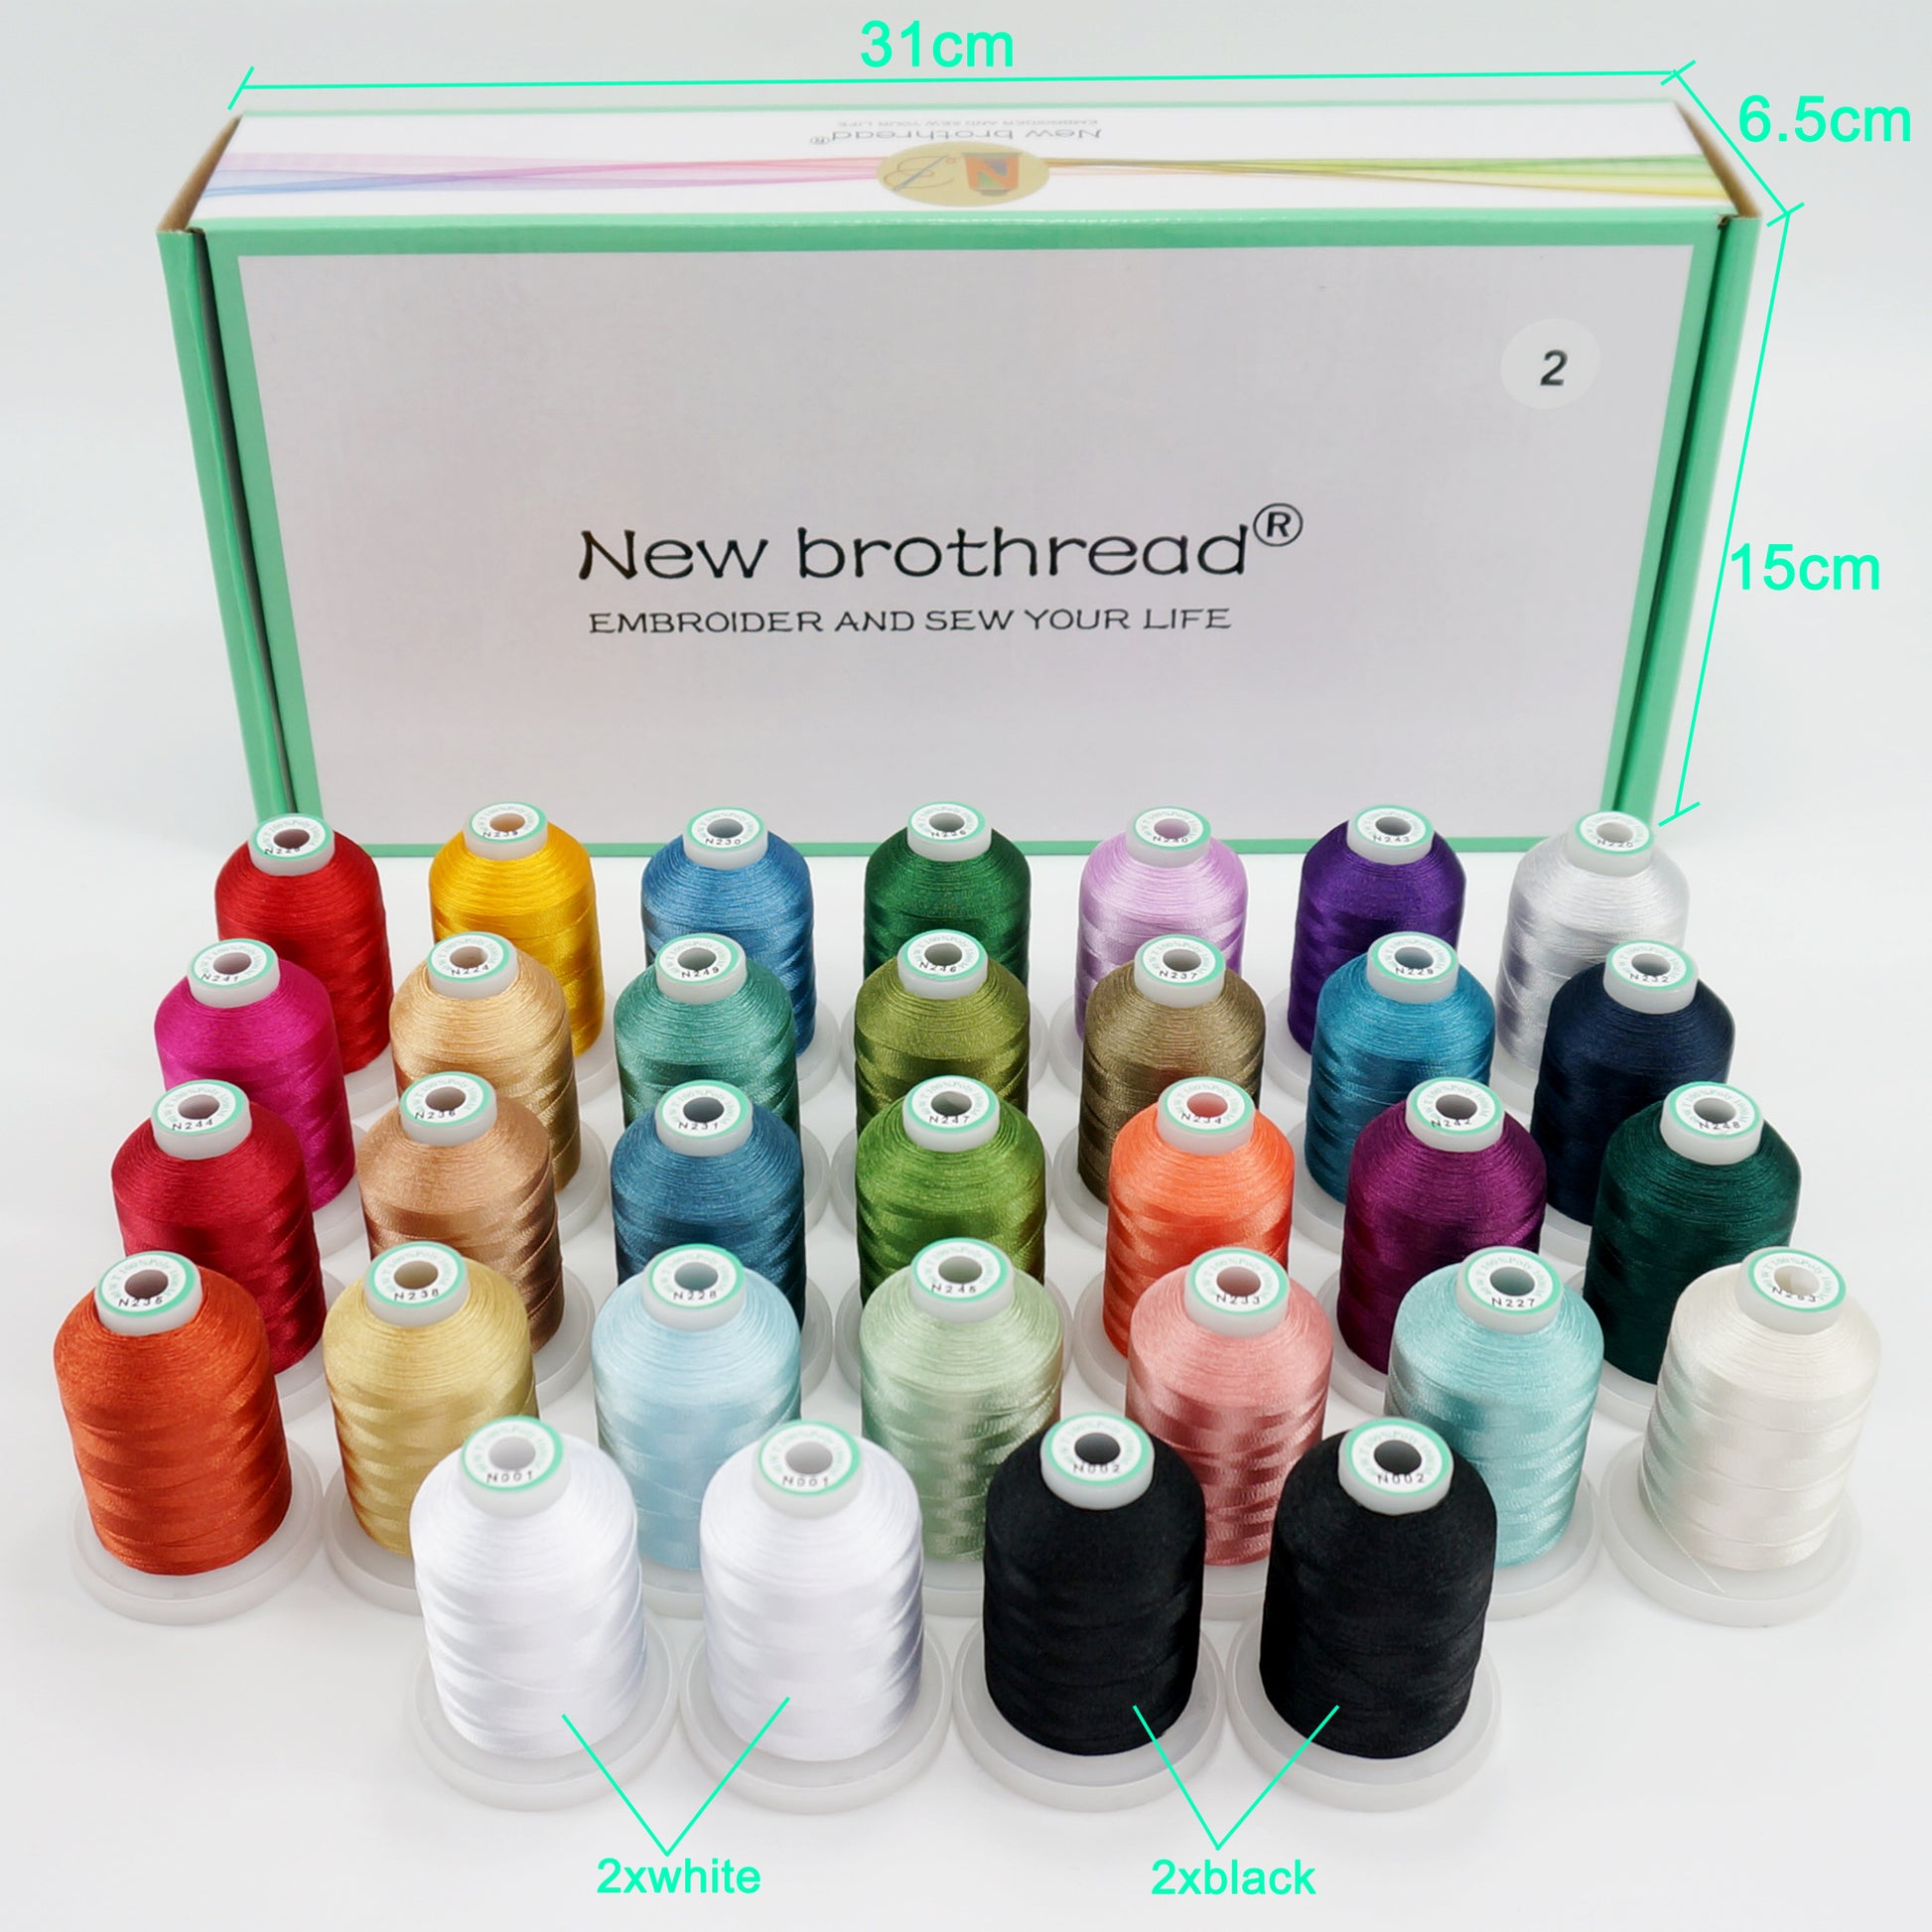 New brothread Single Spool 1000M Each Polyester Embroidery Machine Thread  40WT - 63 Colors